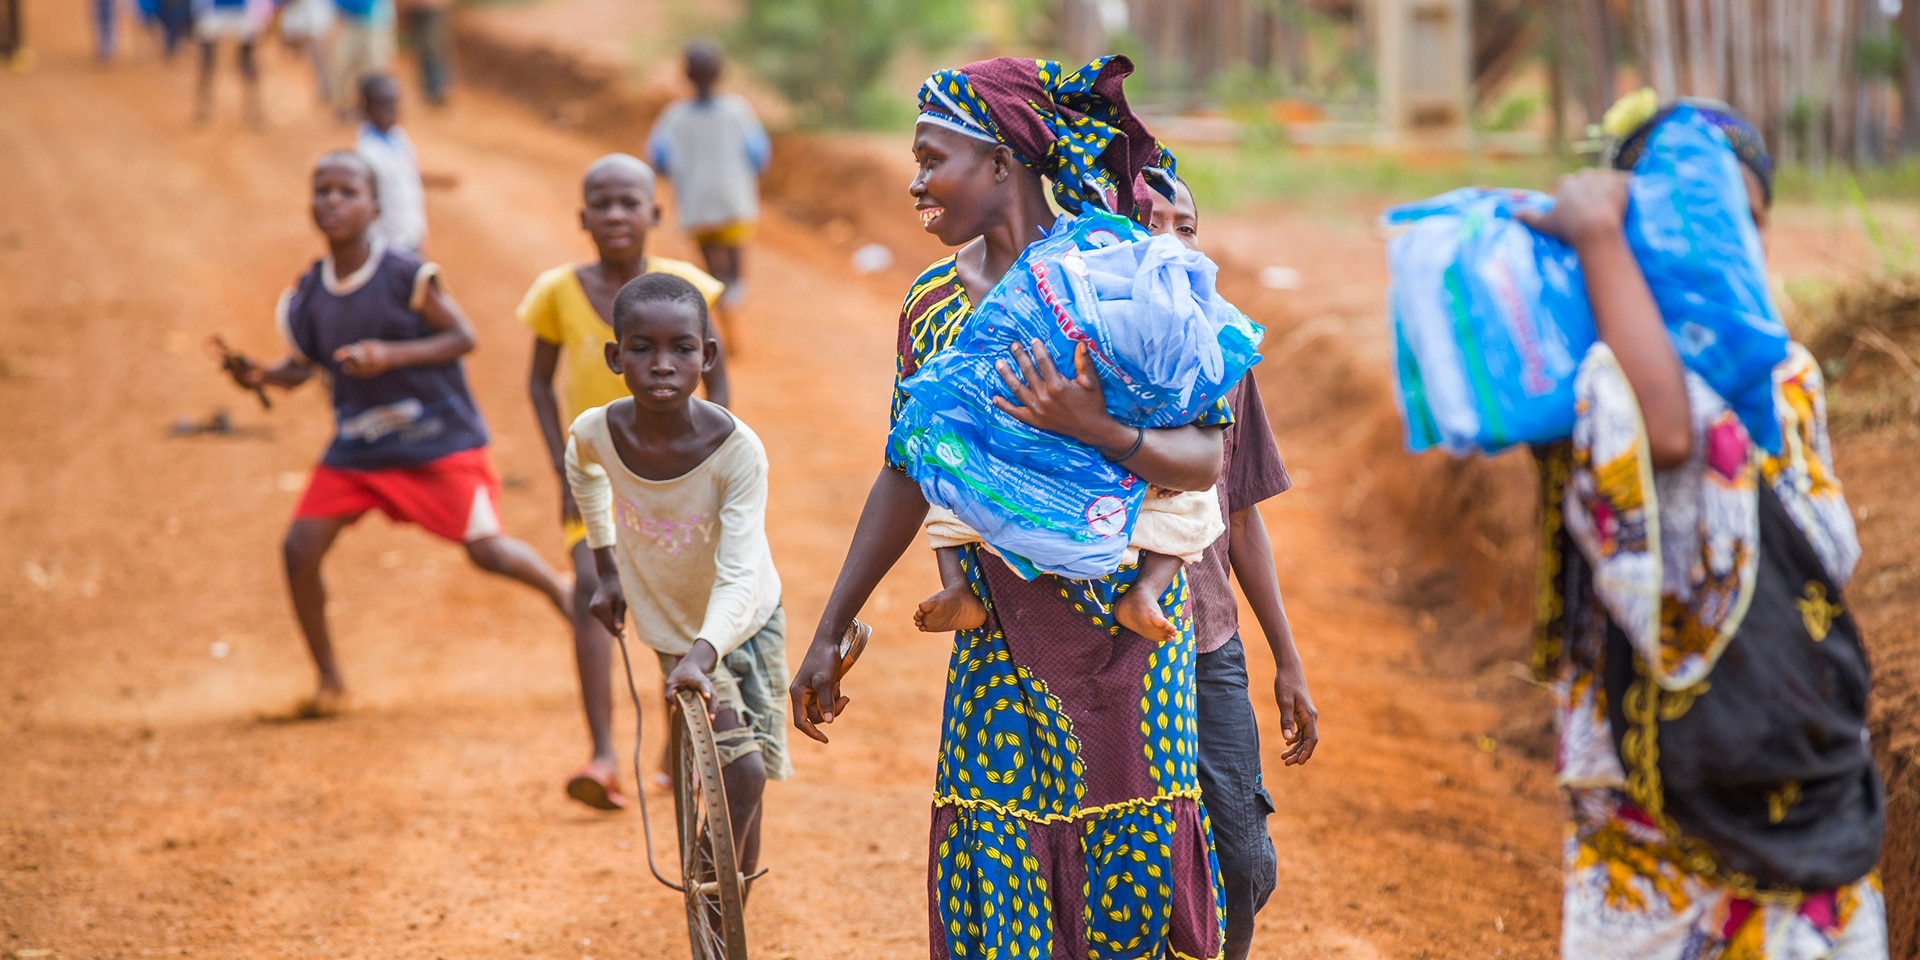 A woman in the foreground is walking with mosquito nets in her hands. Behind her are children.